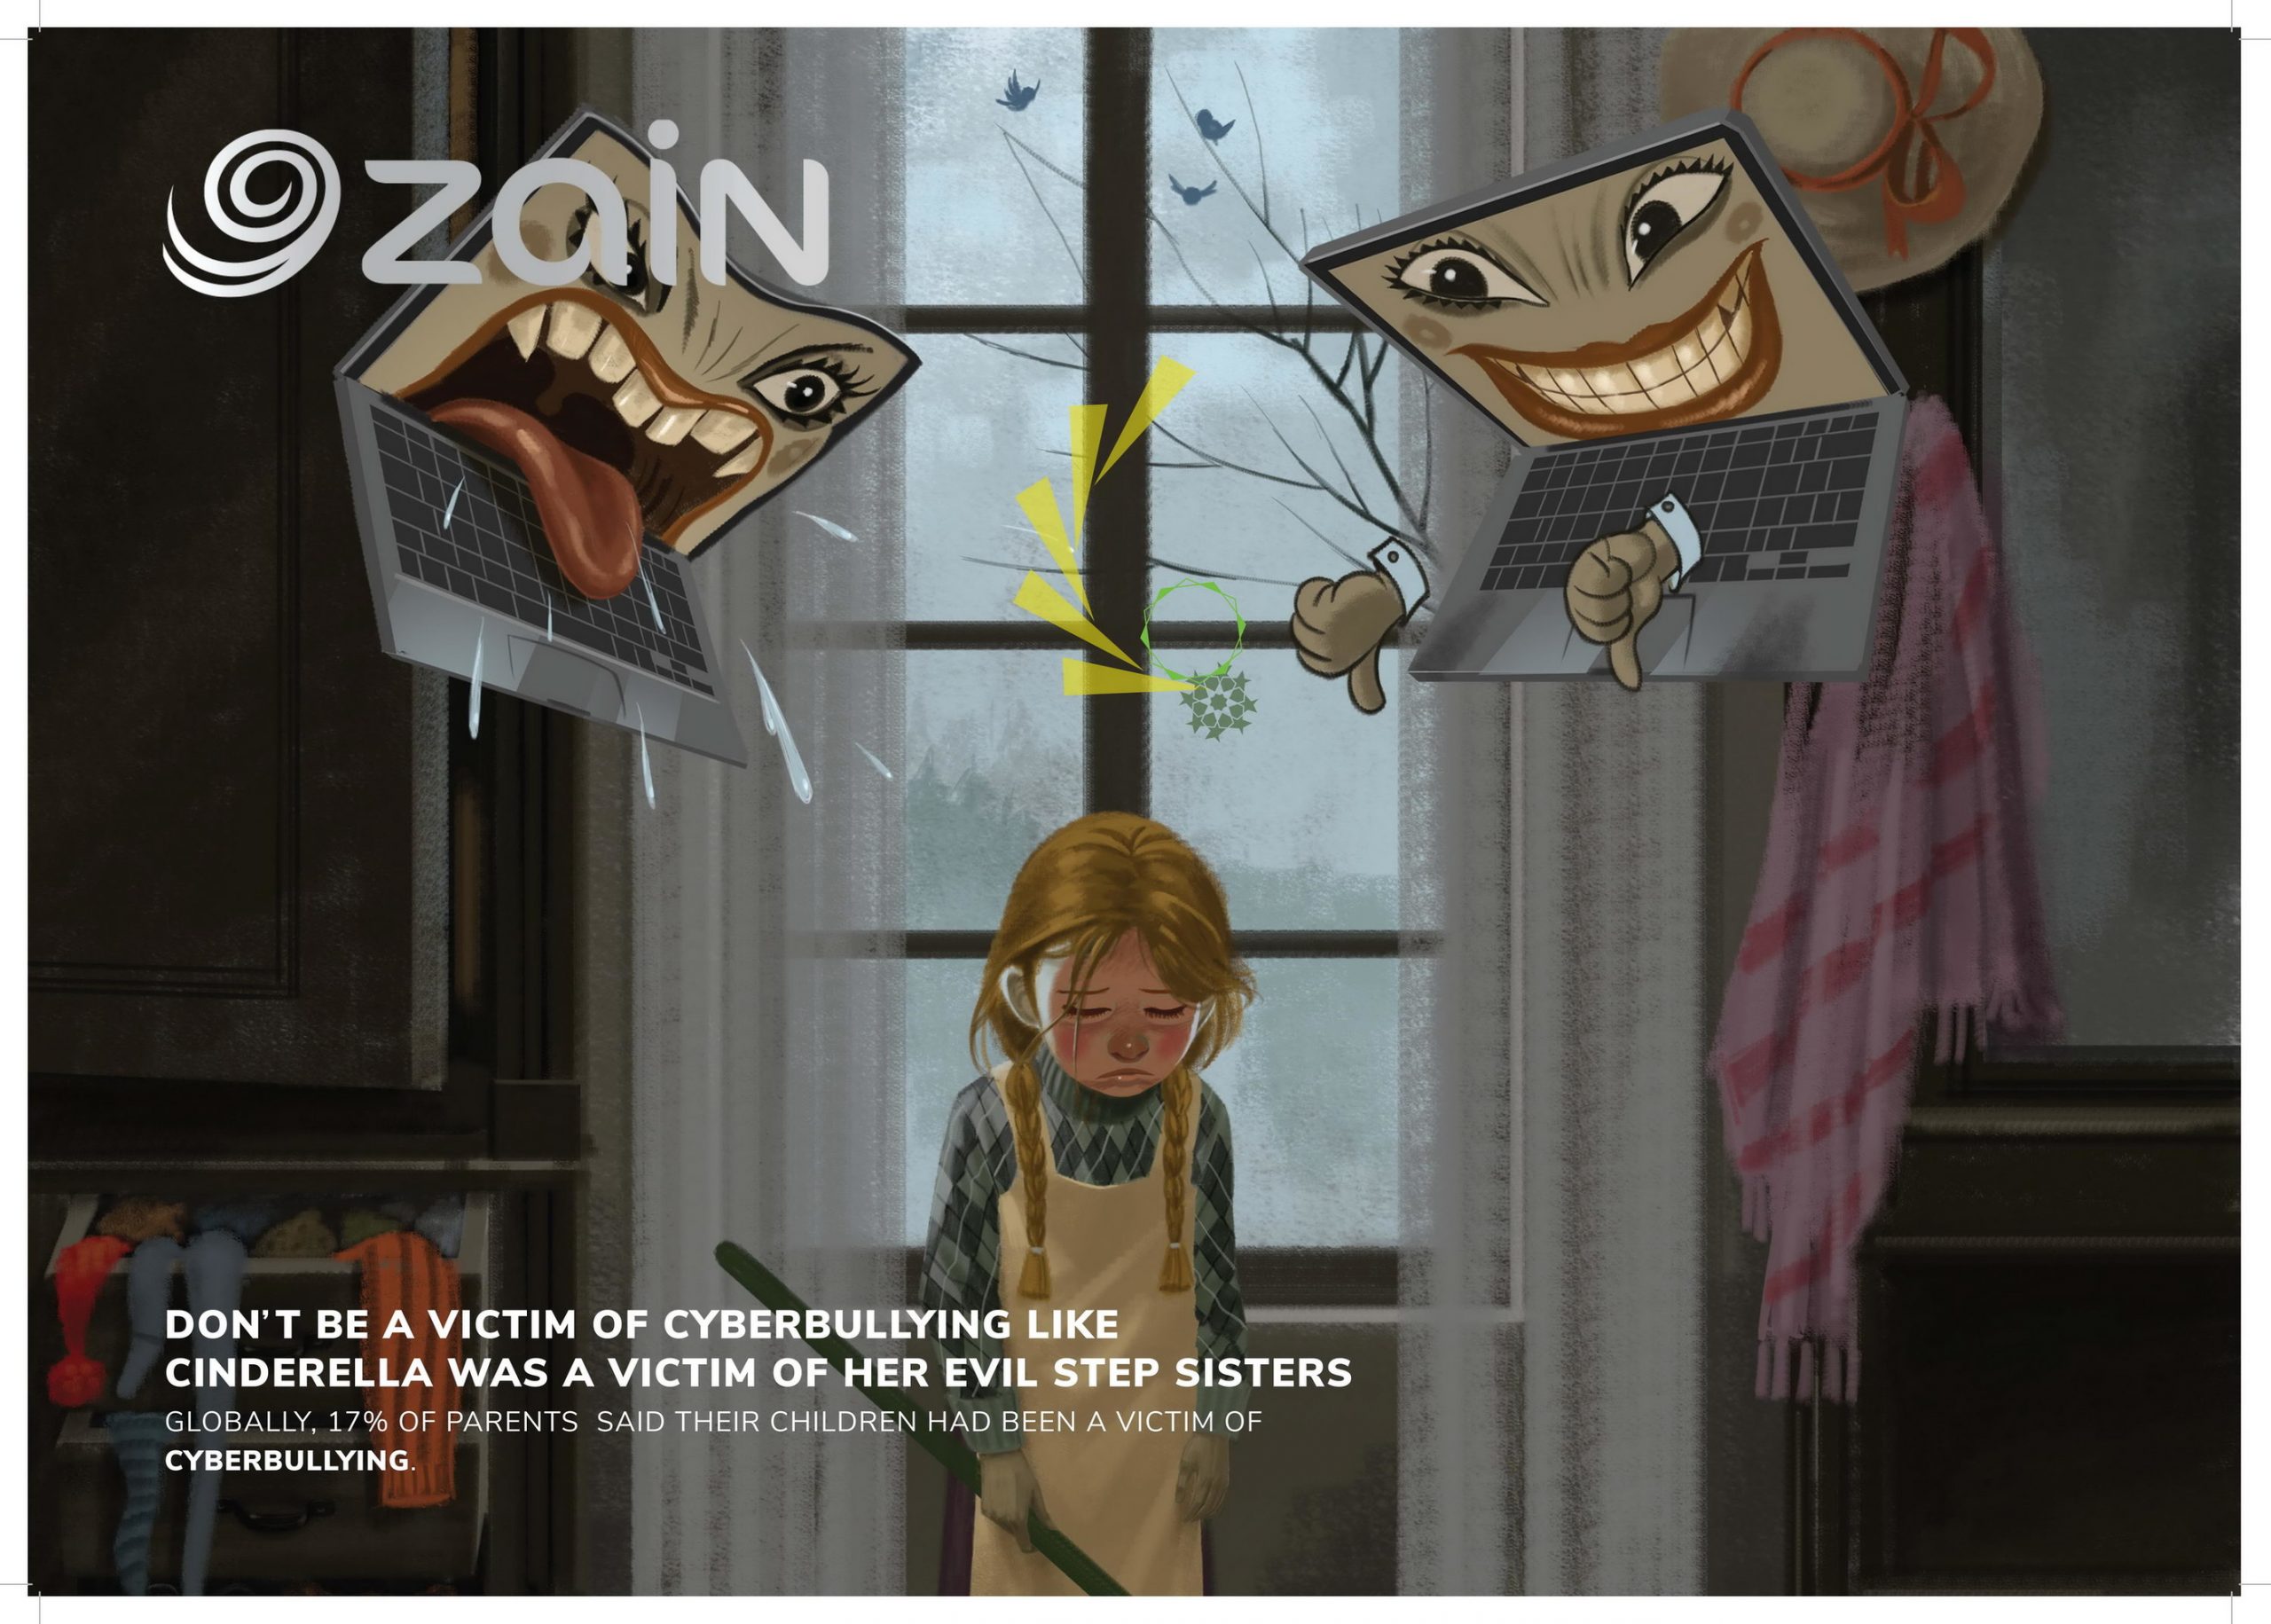 Internet Monsters': Kuwait's Zain Group promotes online safety for kids  with new campaign 